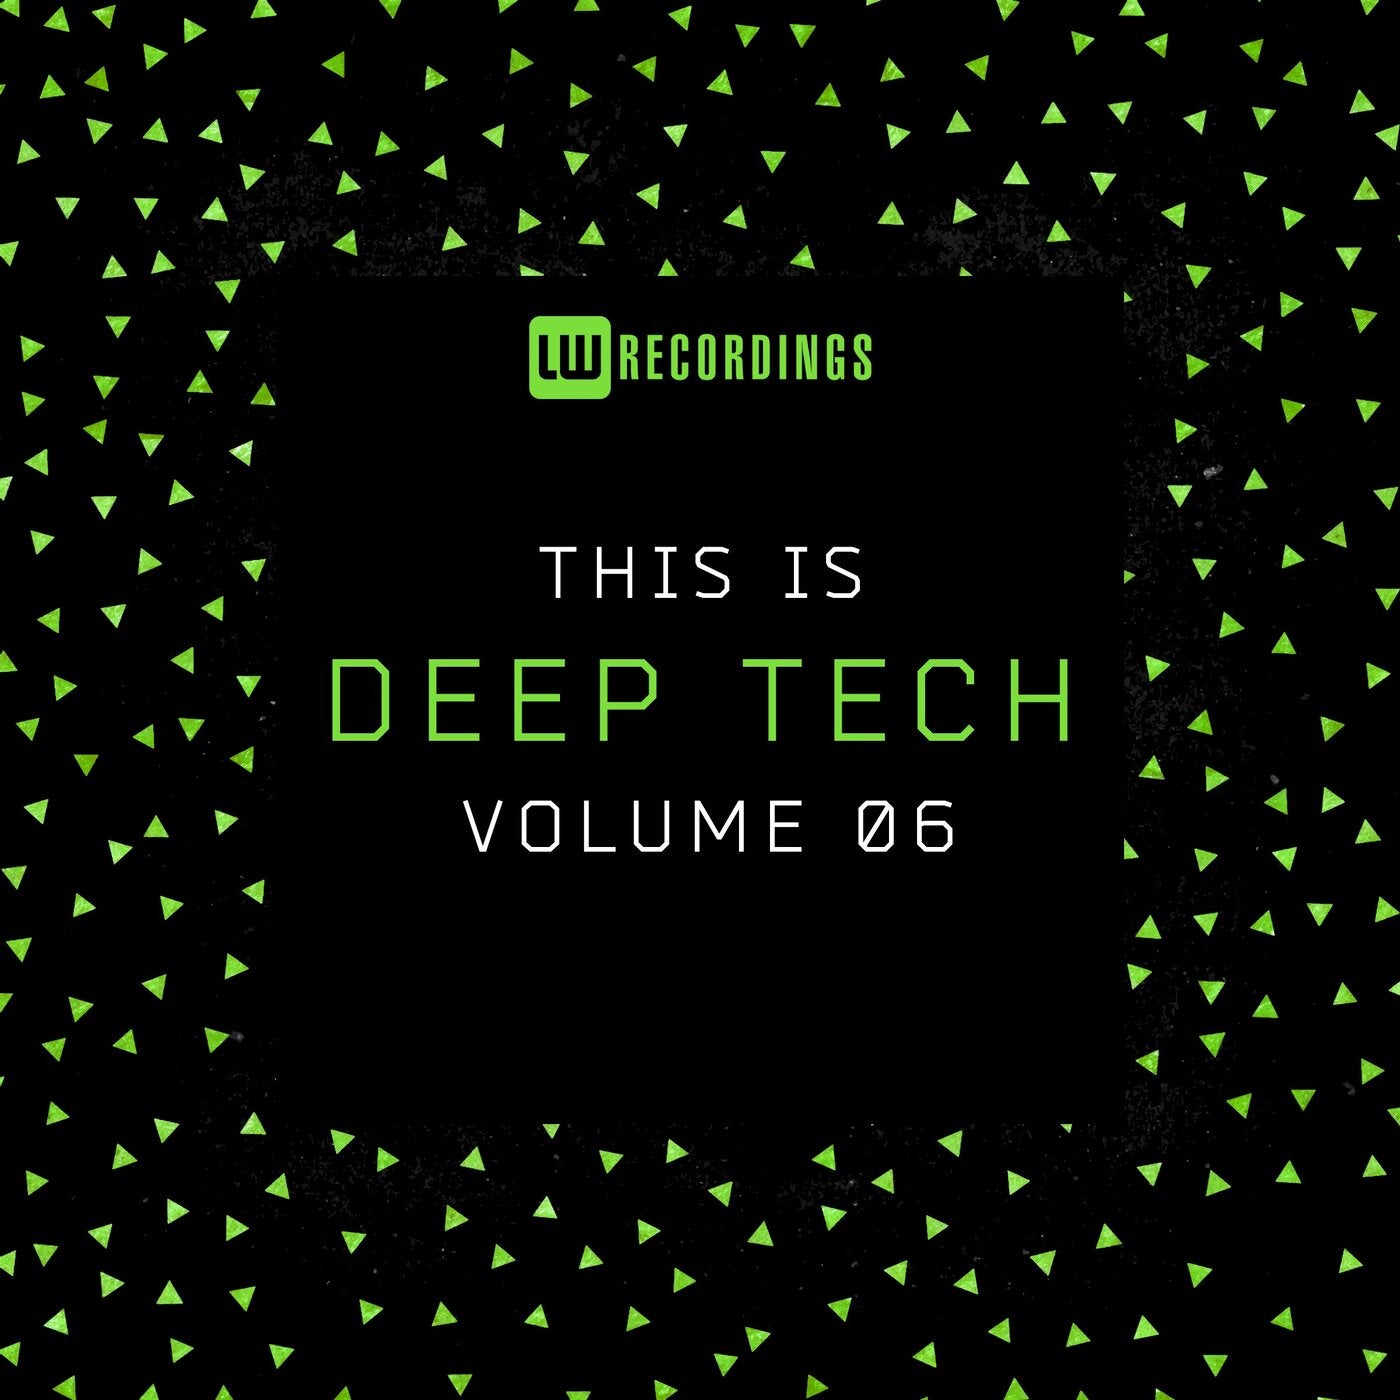 This Is Deep Tech, Vol. 06